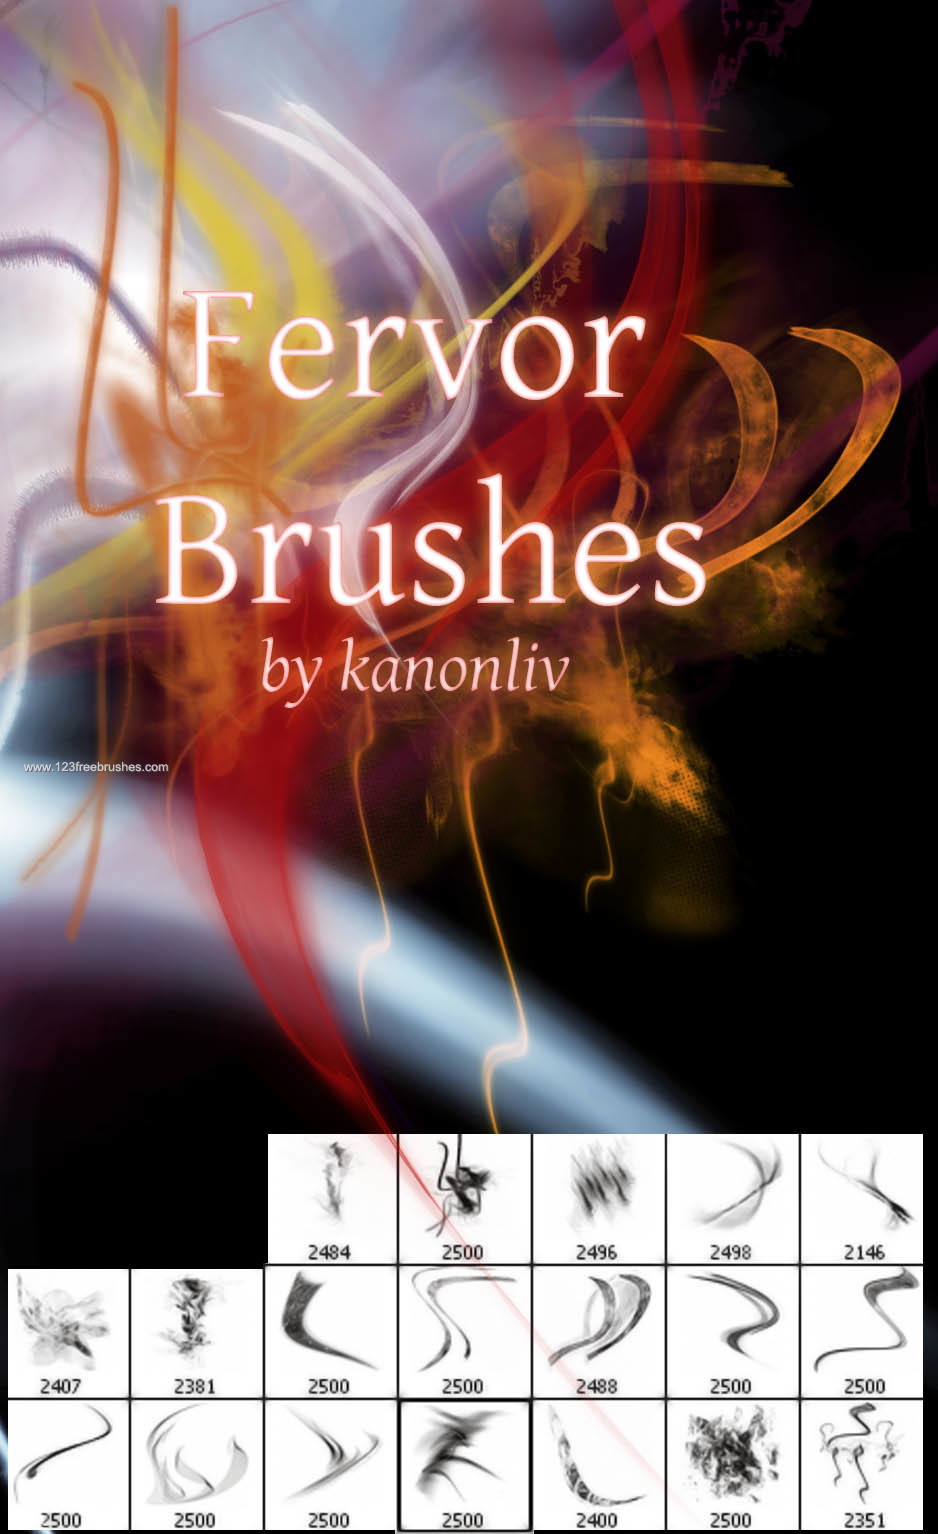 Abstract Brushes For Adobe Photoshop Cs5